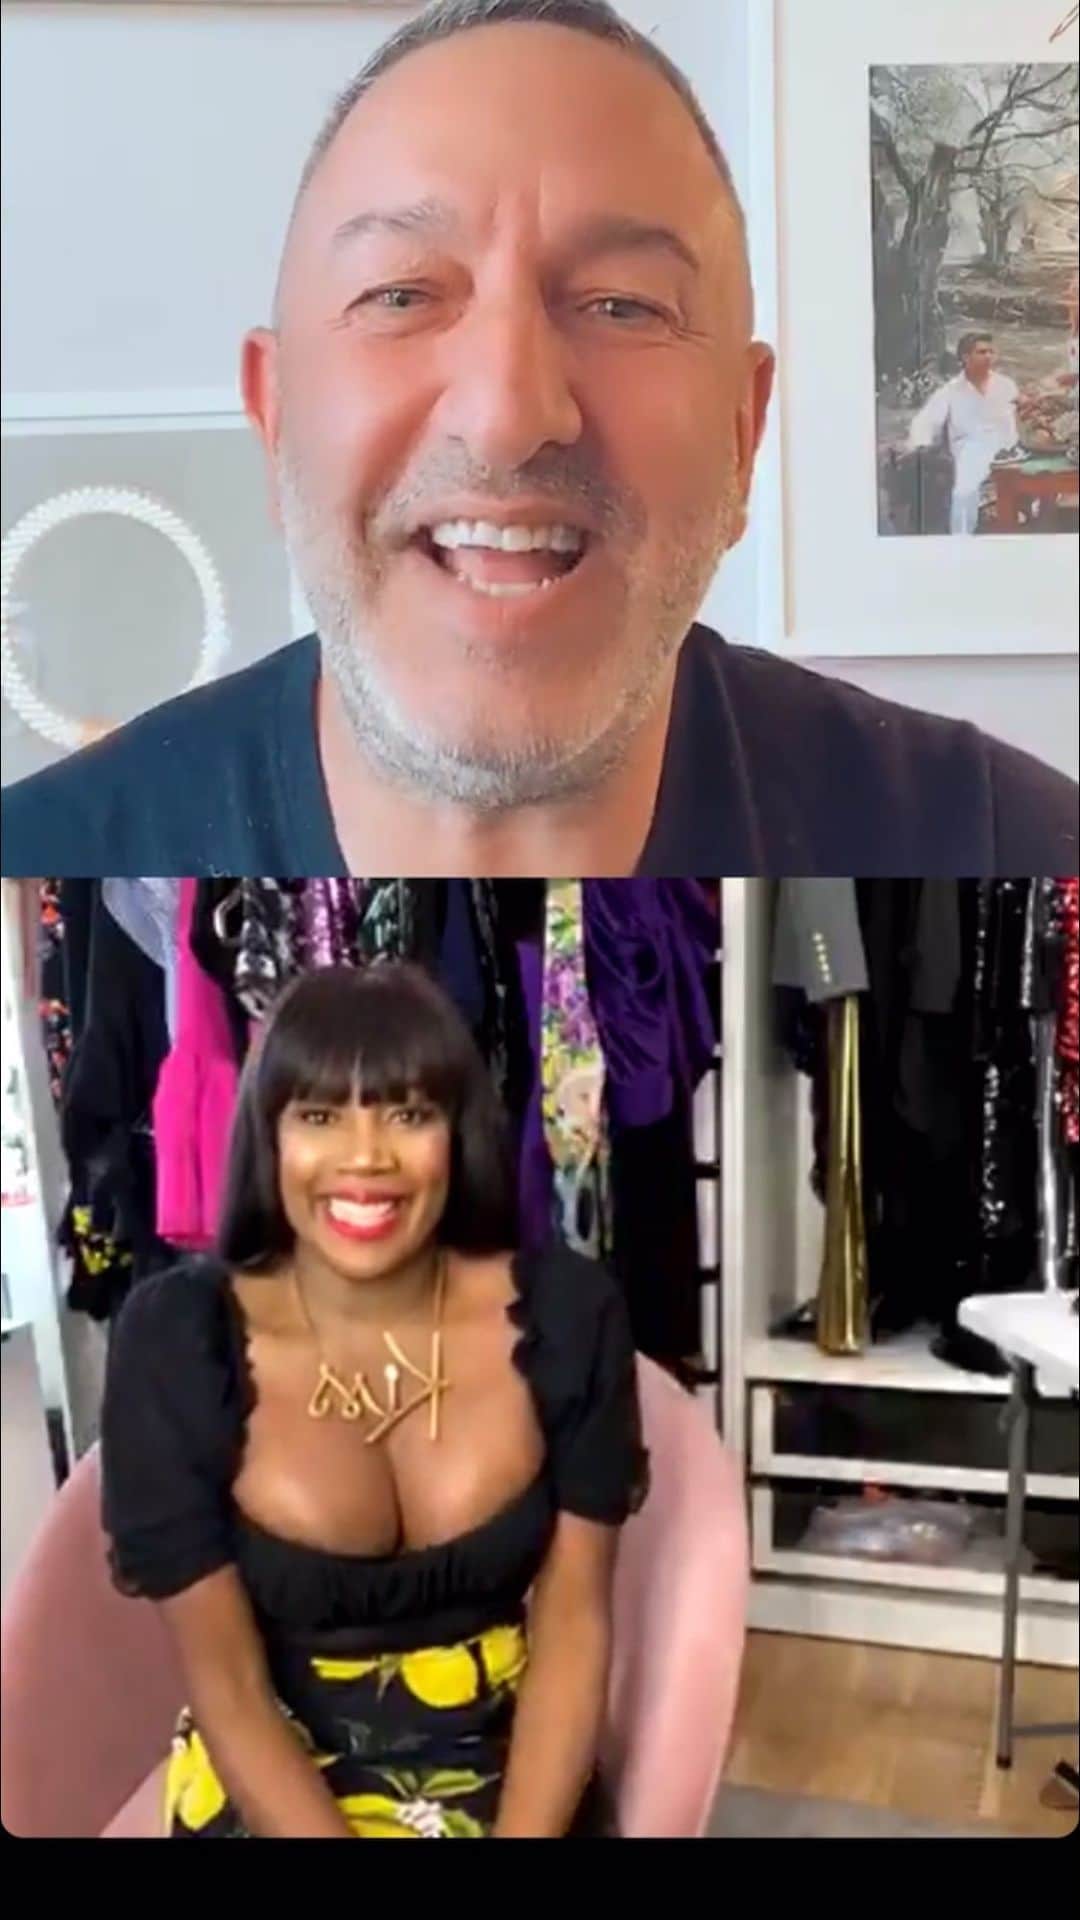 Kissのインスタグラム：「Had so much fun doing my very first IG Live sale from my closet today with the one and only fashion and vintage guru @covetbychristos!! We chatted about fashion, drank wine, and sold some bomb bags, shoes, and clothes! We’ll be doing another one in a month or so, so be on the lookout for details!」